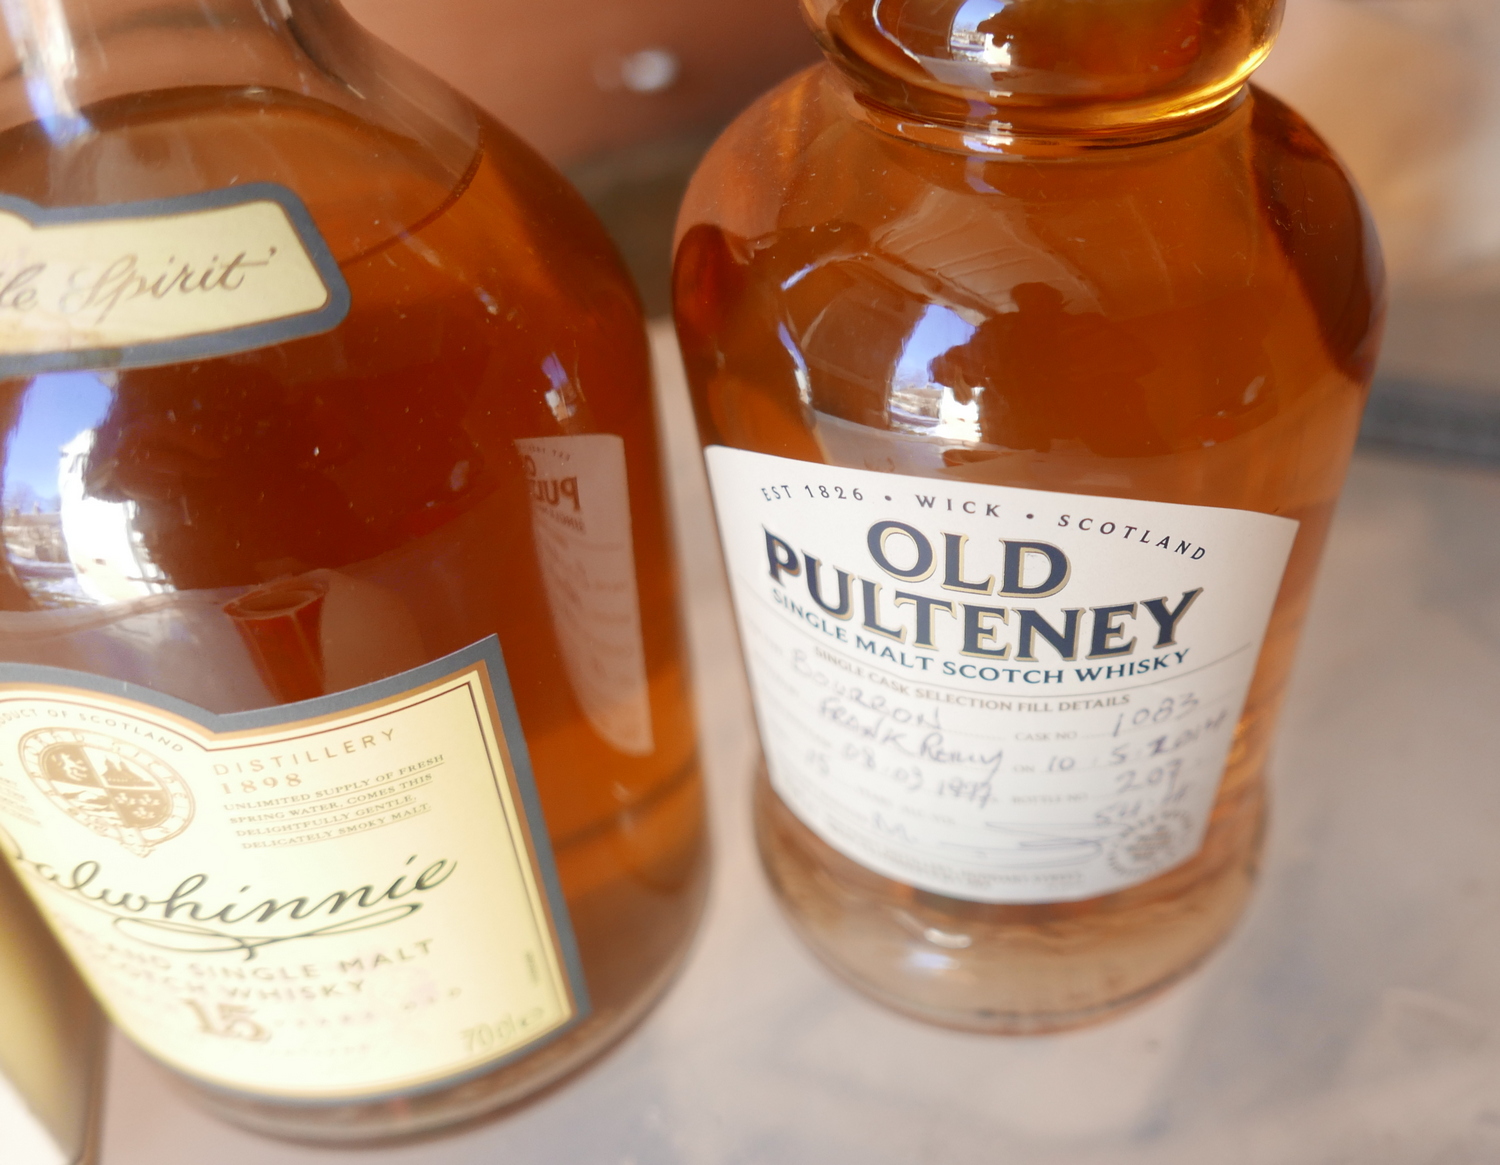 Dalwhinnie 15 year old and Old Pulteney Whiskies. - Image 2 of 2